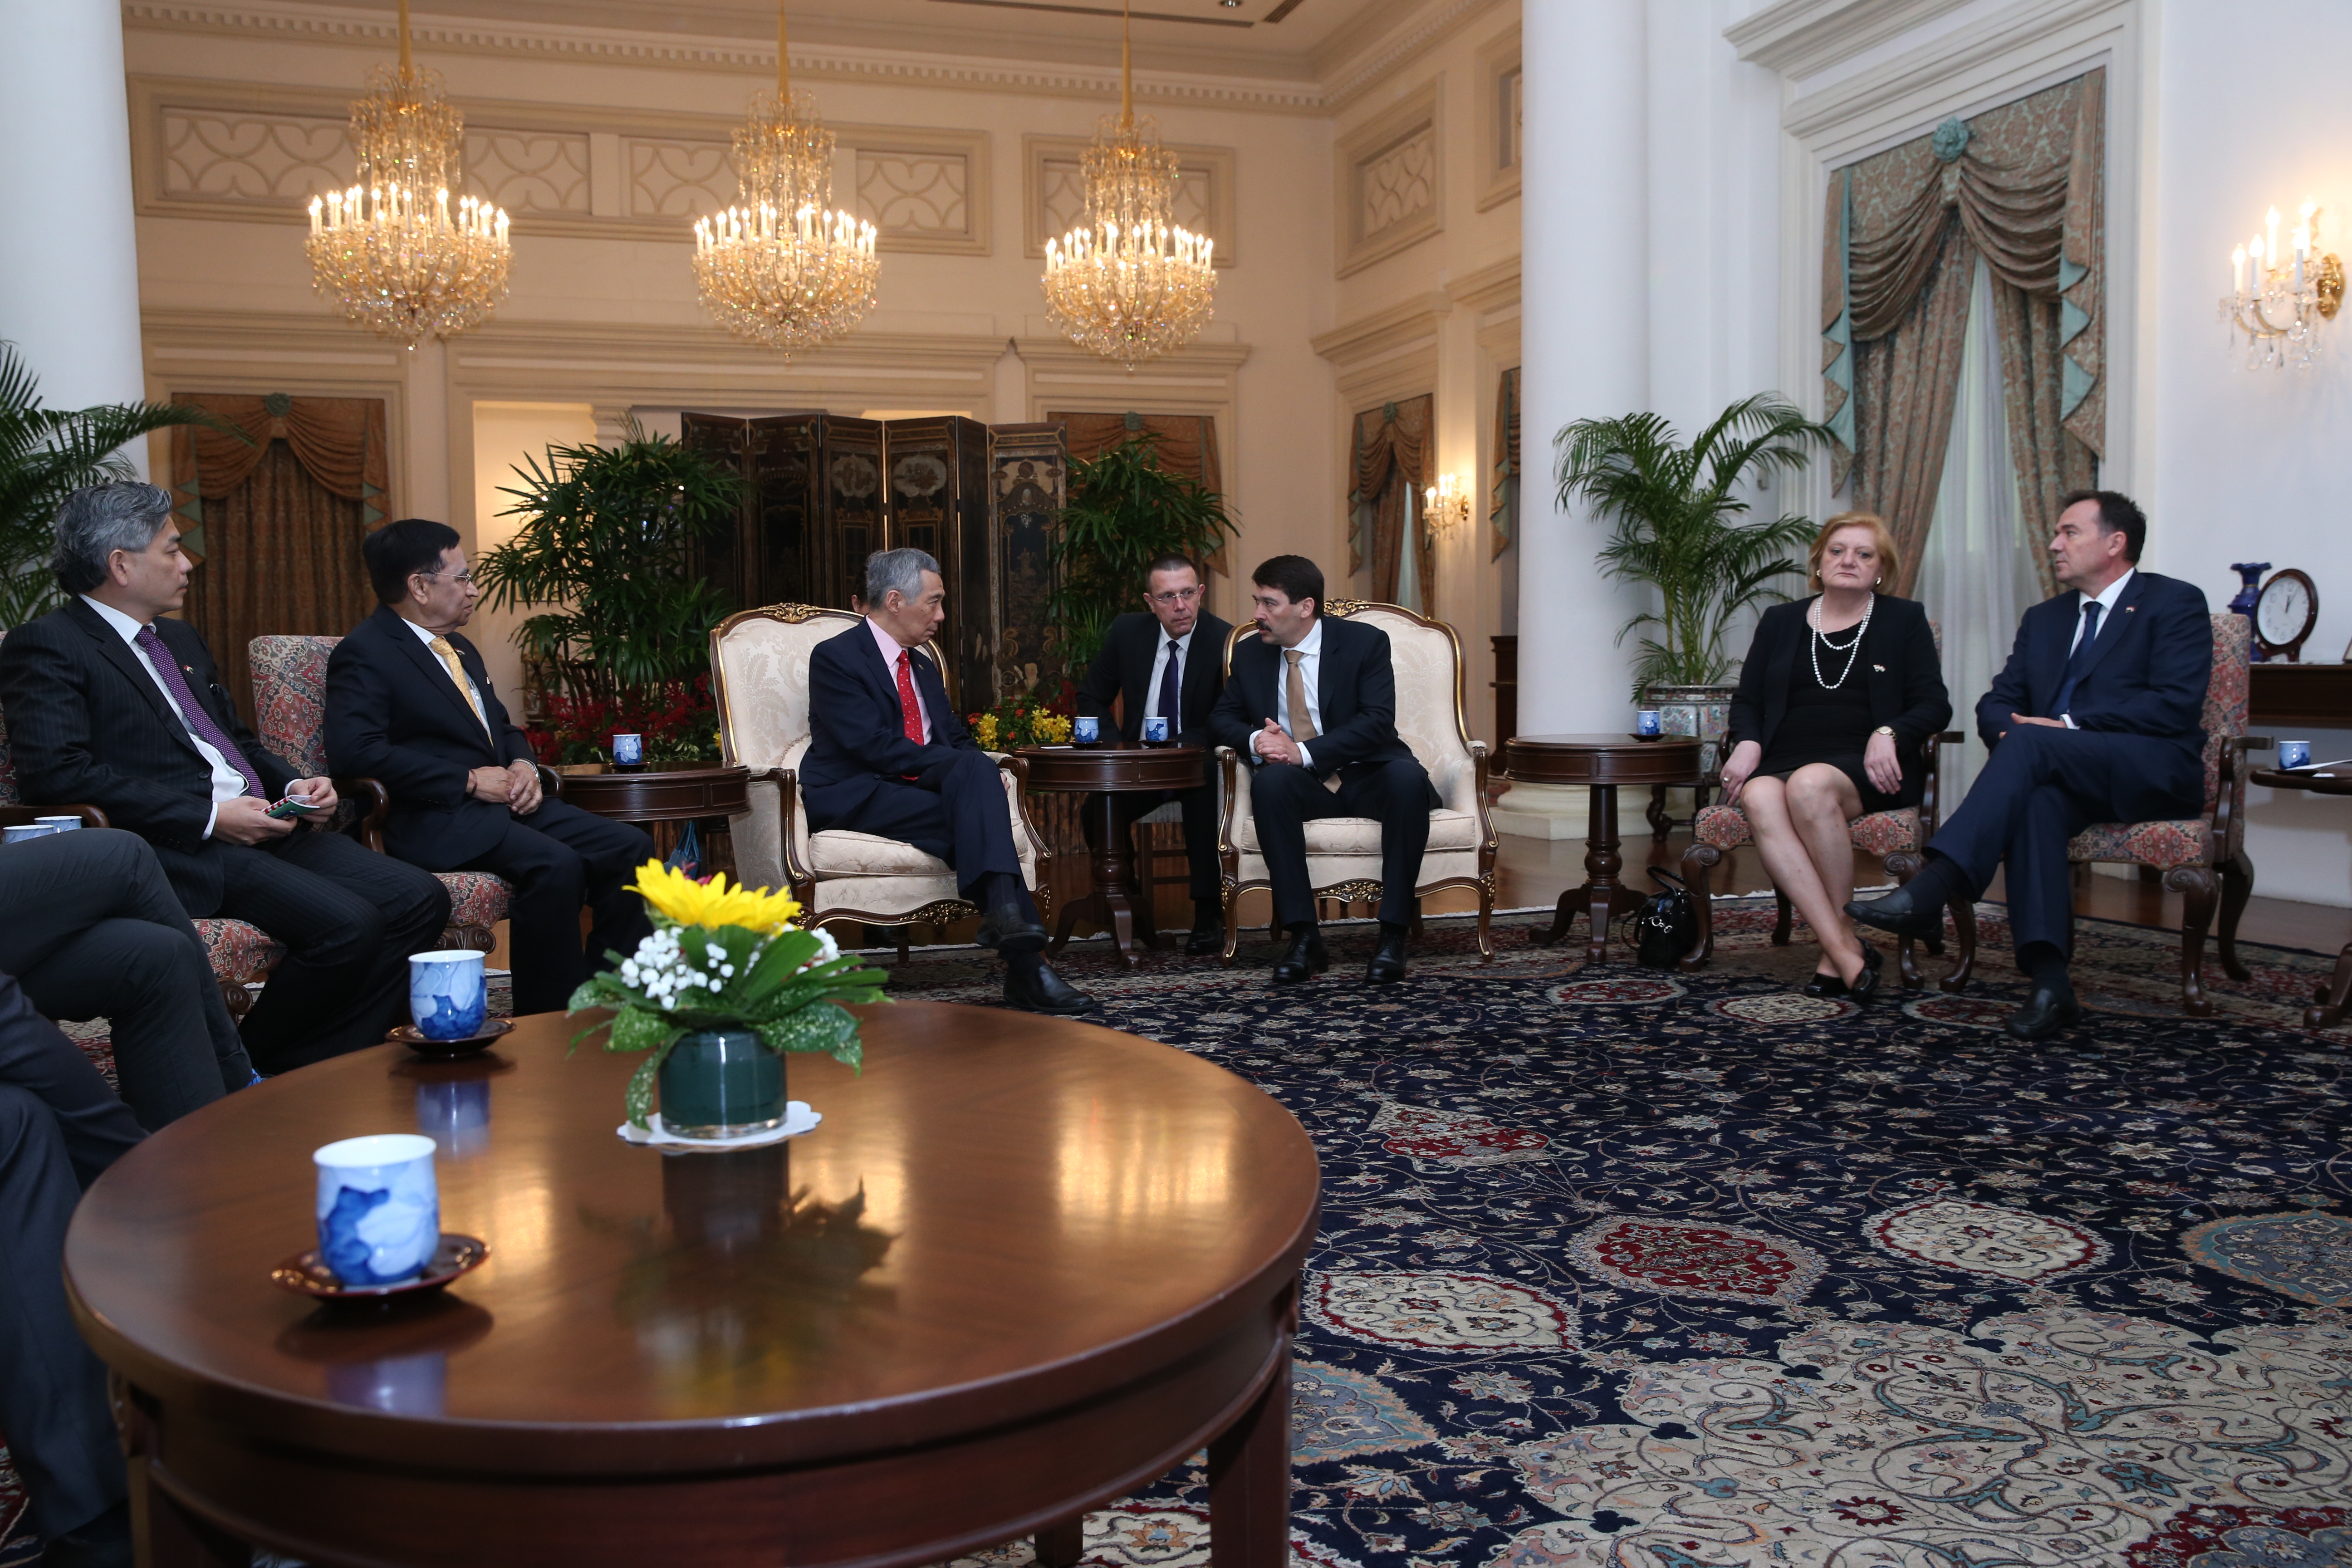 Call on Prime Minister Lee Hsien Loong by Prime Minister of Hungary Dr János Áder at the Istana on 9 Apr 2015 (MCI Photo by LH Goh)